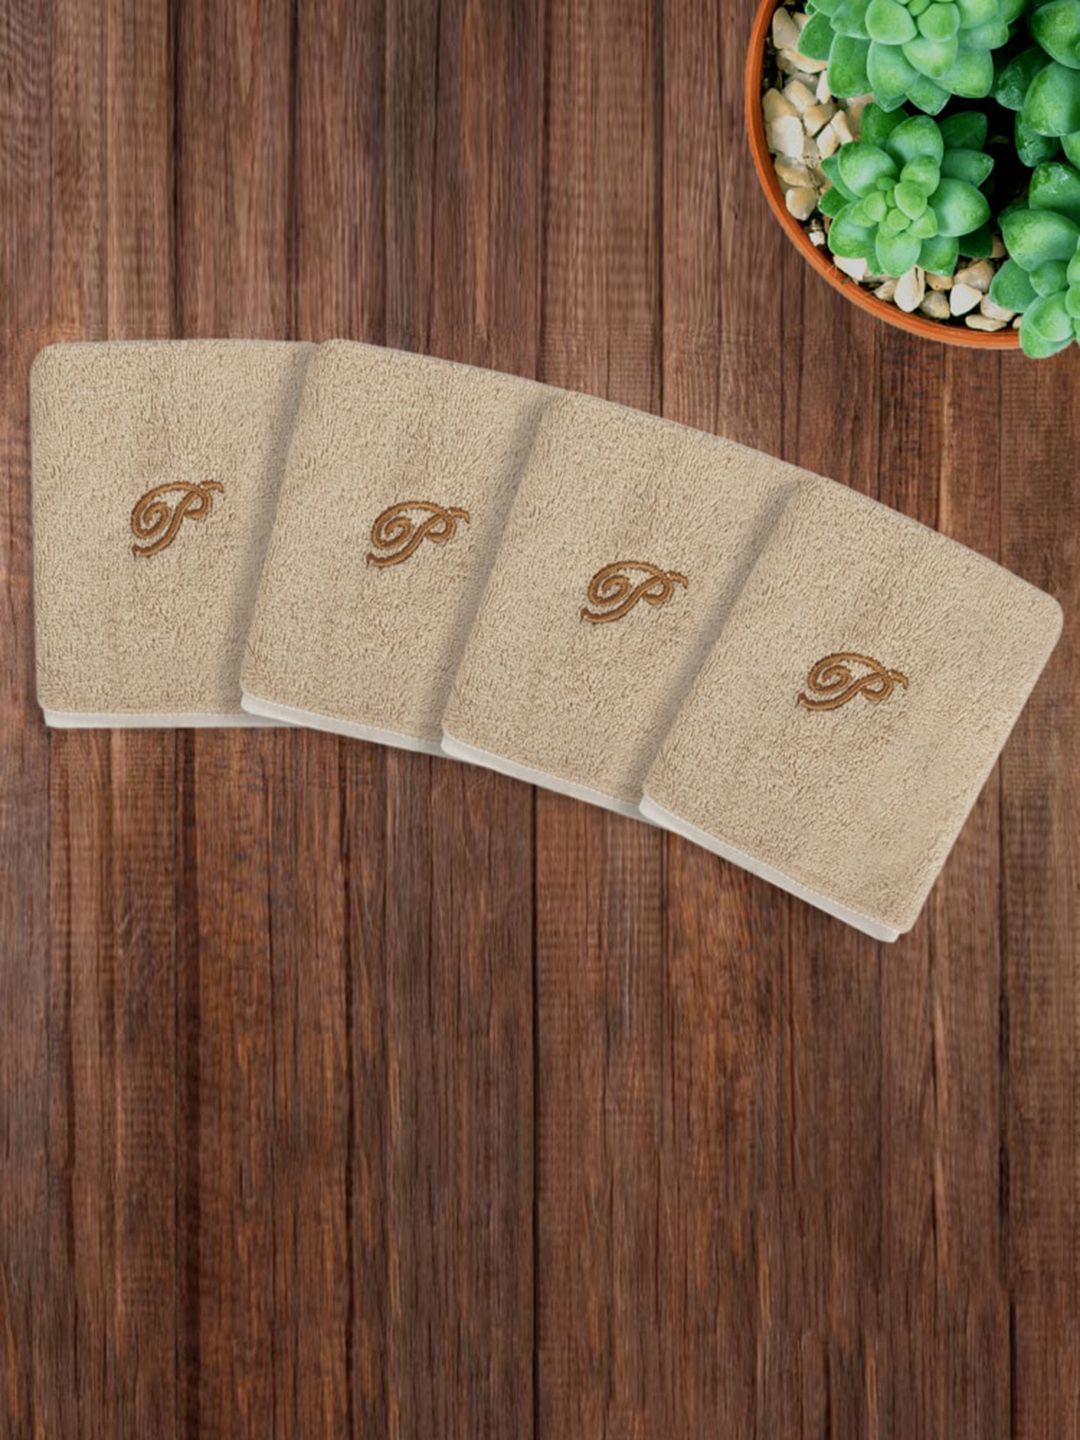 LUSH & BEYOND Set Of 4 Solid 500 GSM Pure Cotton Face Towels Price in India